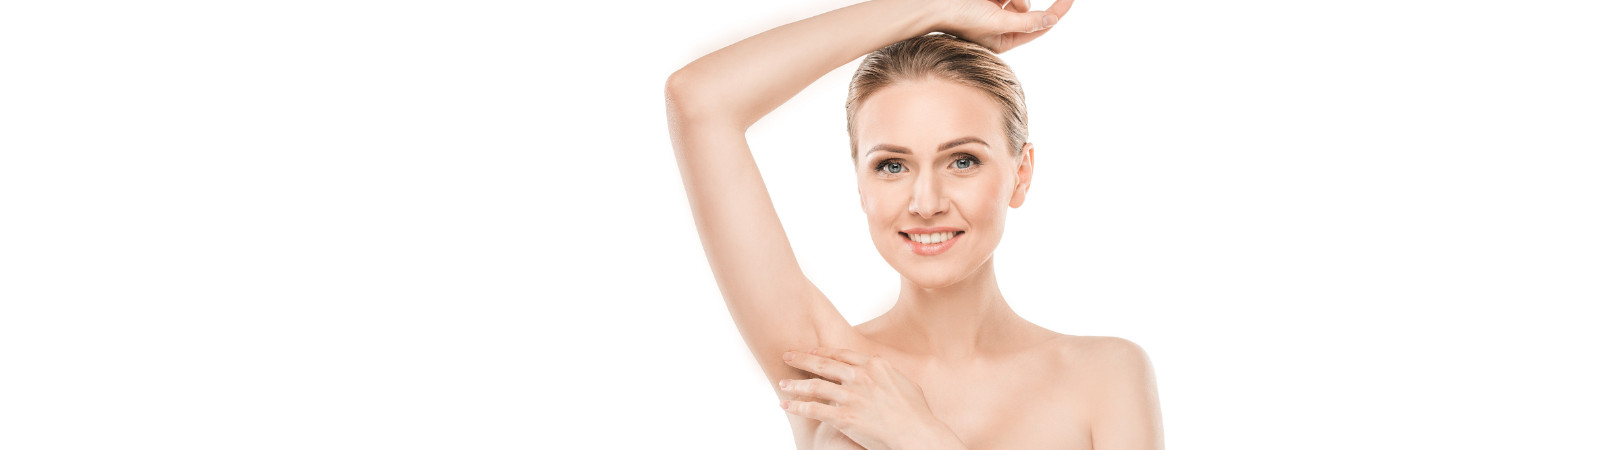 Laser/IPL Hair Removal | Victoria's Cosmetic Medical Clinic